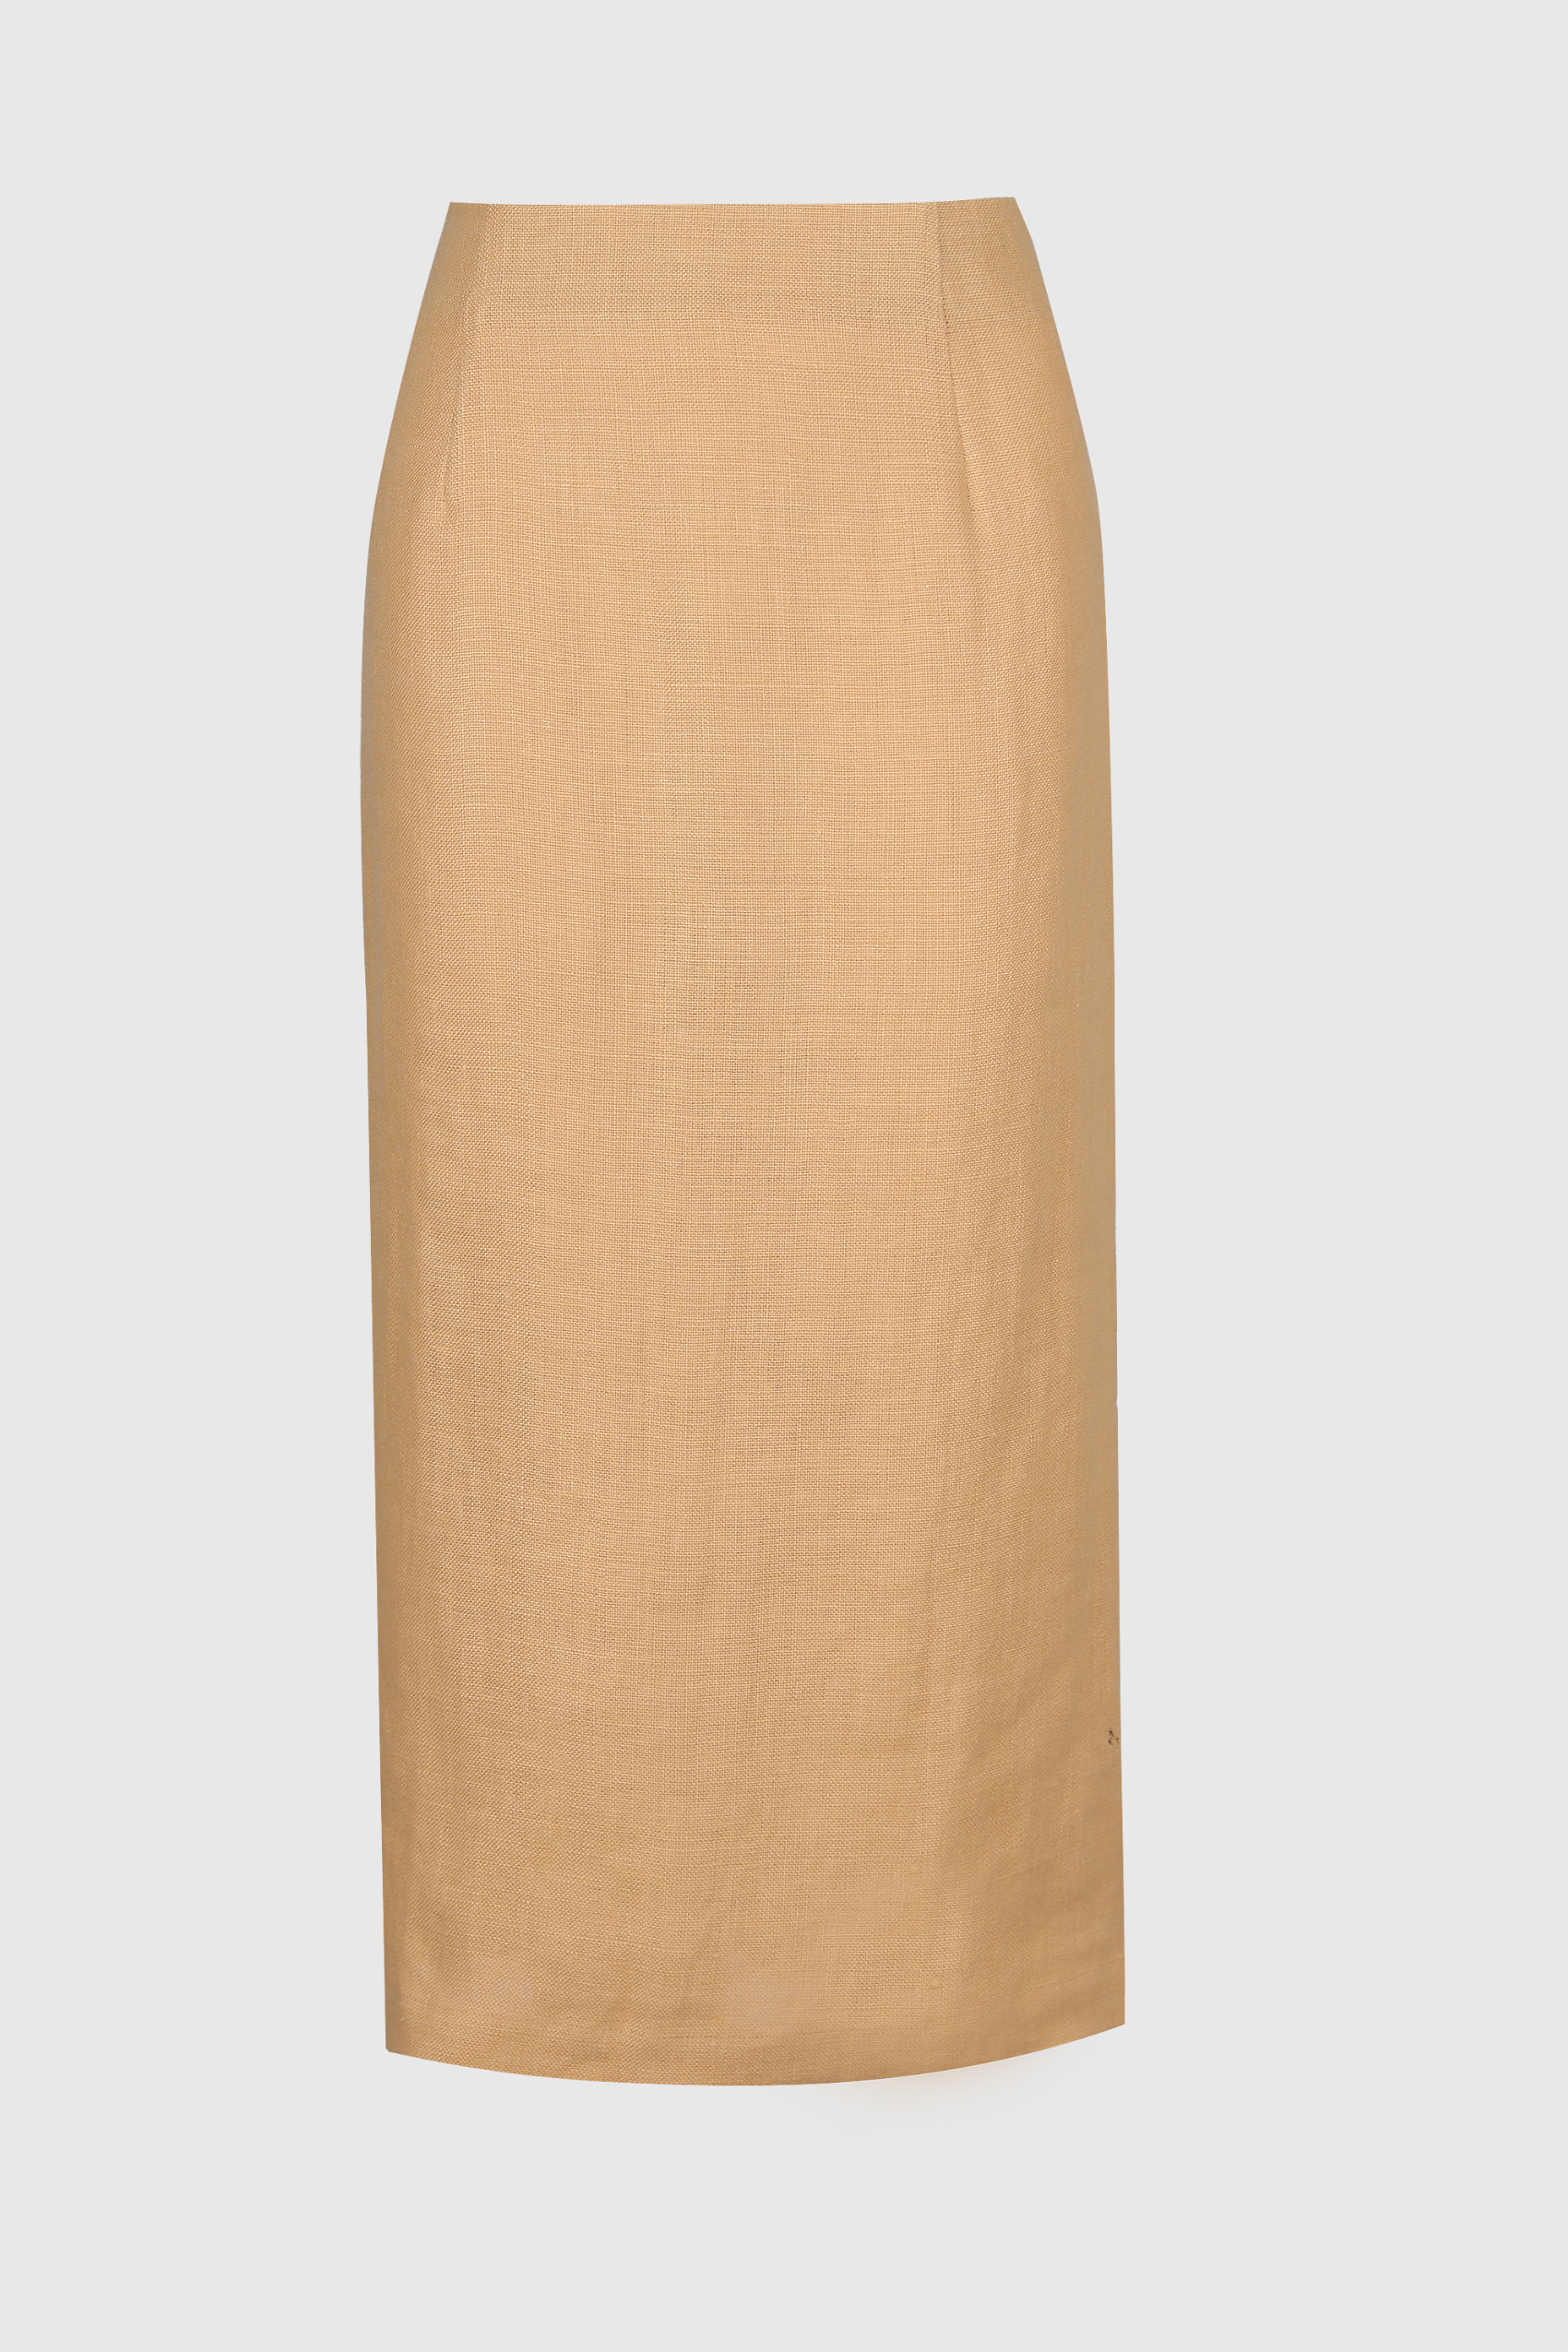 HIGH QUALITY LINE - HEAVY LINEN MIDI SKIRT Fabric by Style M (Made in JAPAN) Exclusive for Myeyeko